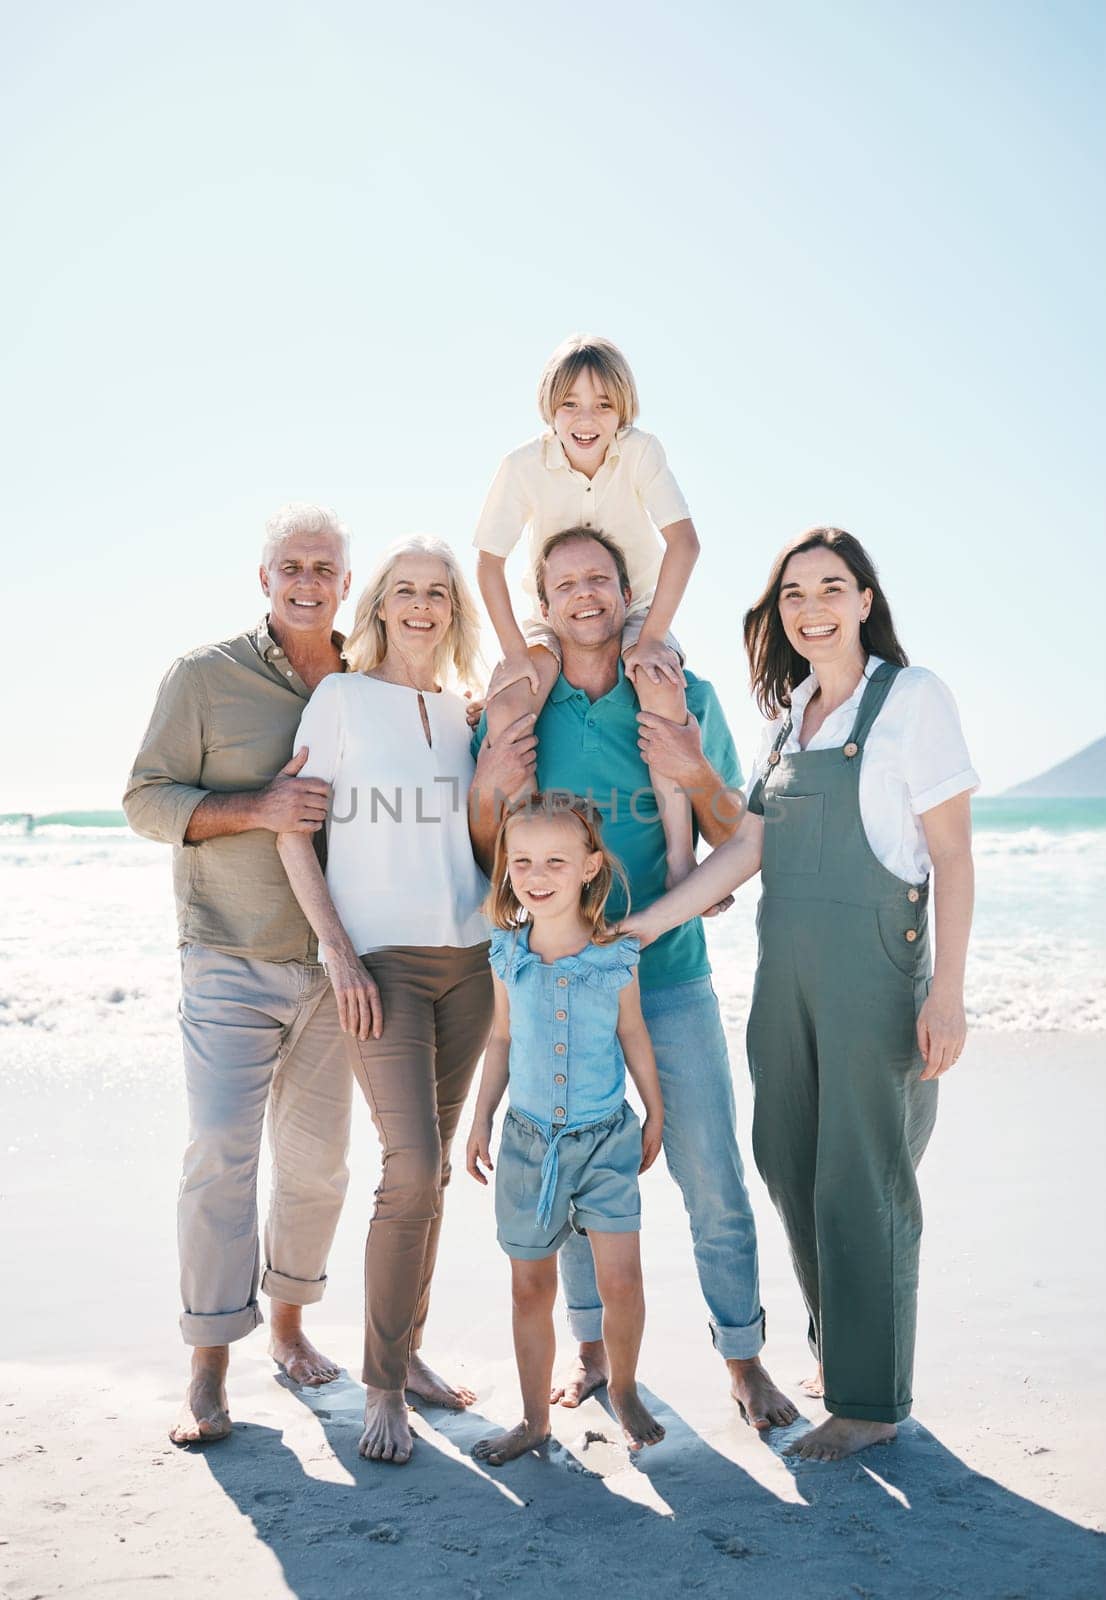 Big family, grandparents portrait or happy kids at sea to relax or travel on beach holiday together. Dad, mom or children siblings love bonding with senior grandmother or grandfather in Australia.